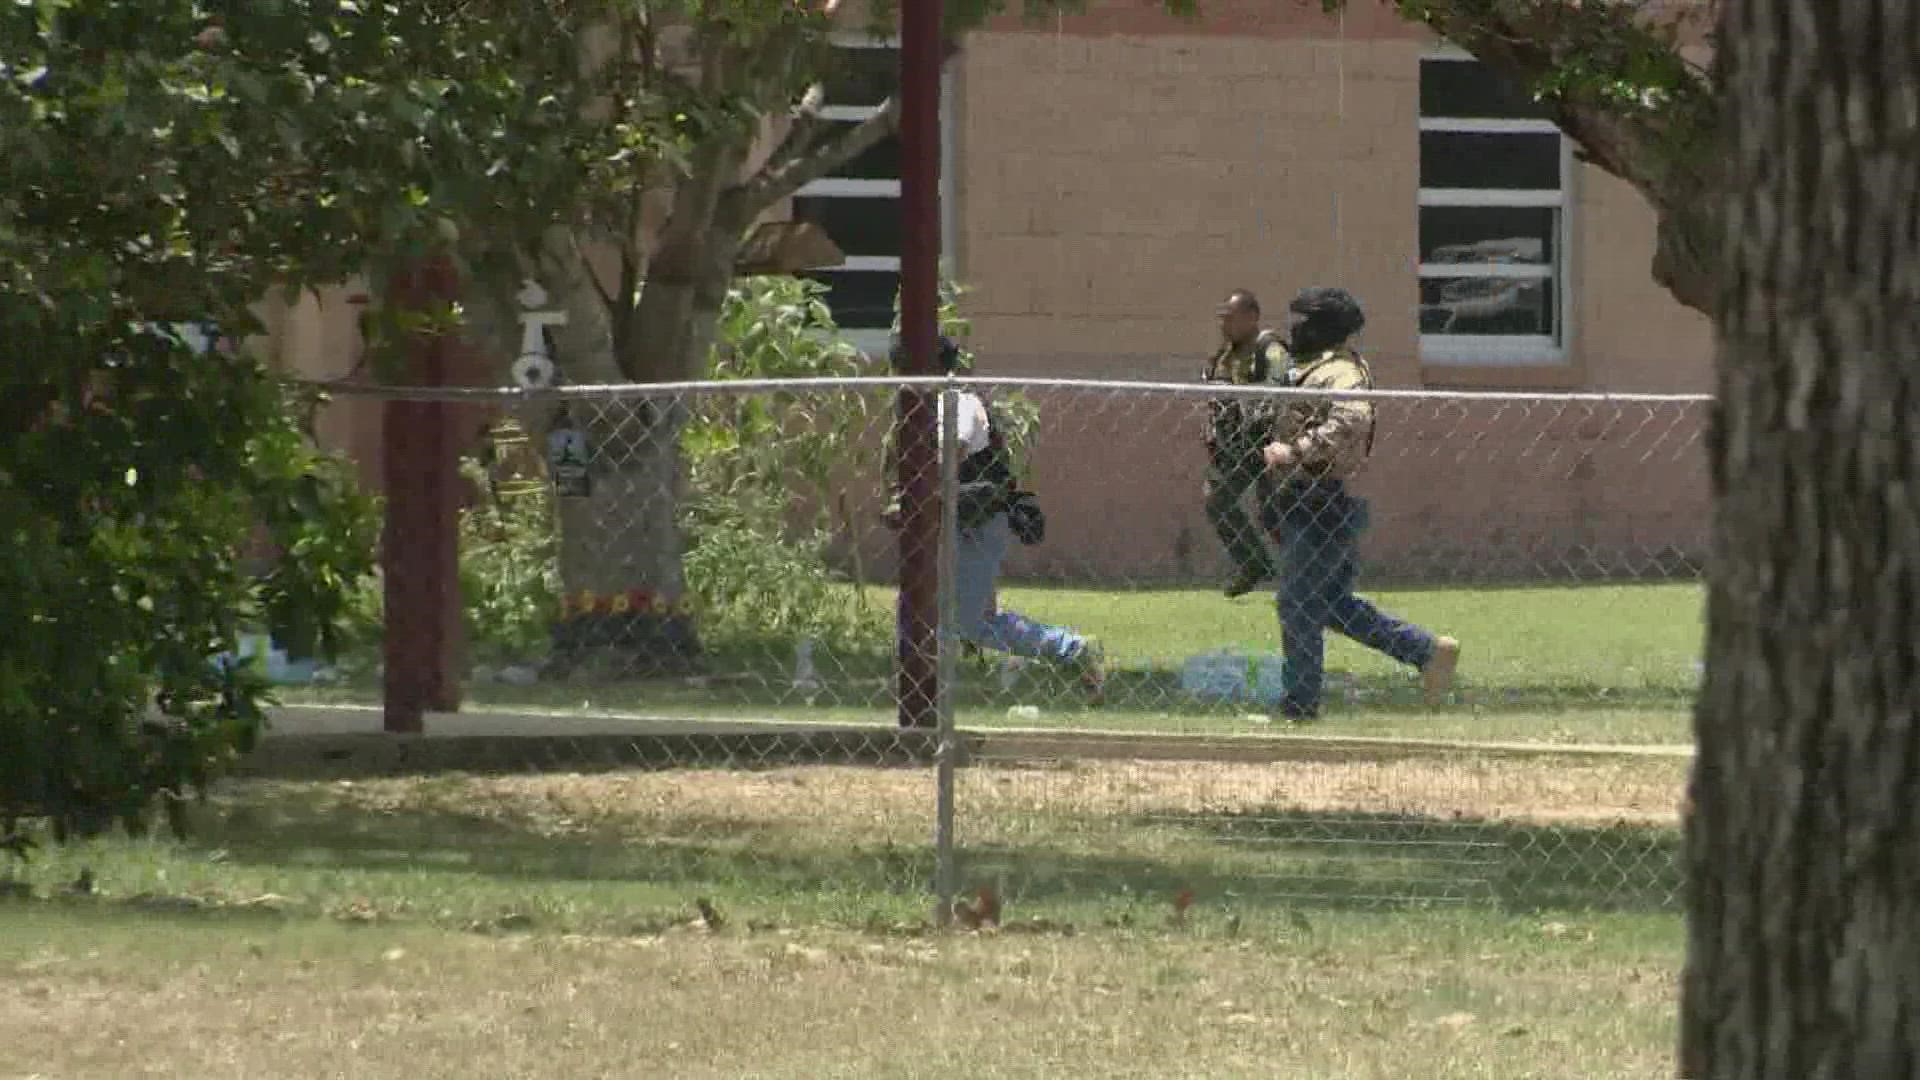 DPS is disputing reports that troopers were standing outside the classroom in Robb Elementary school while students inside were desperately calling 911 for help.